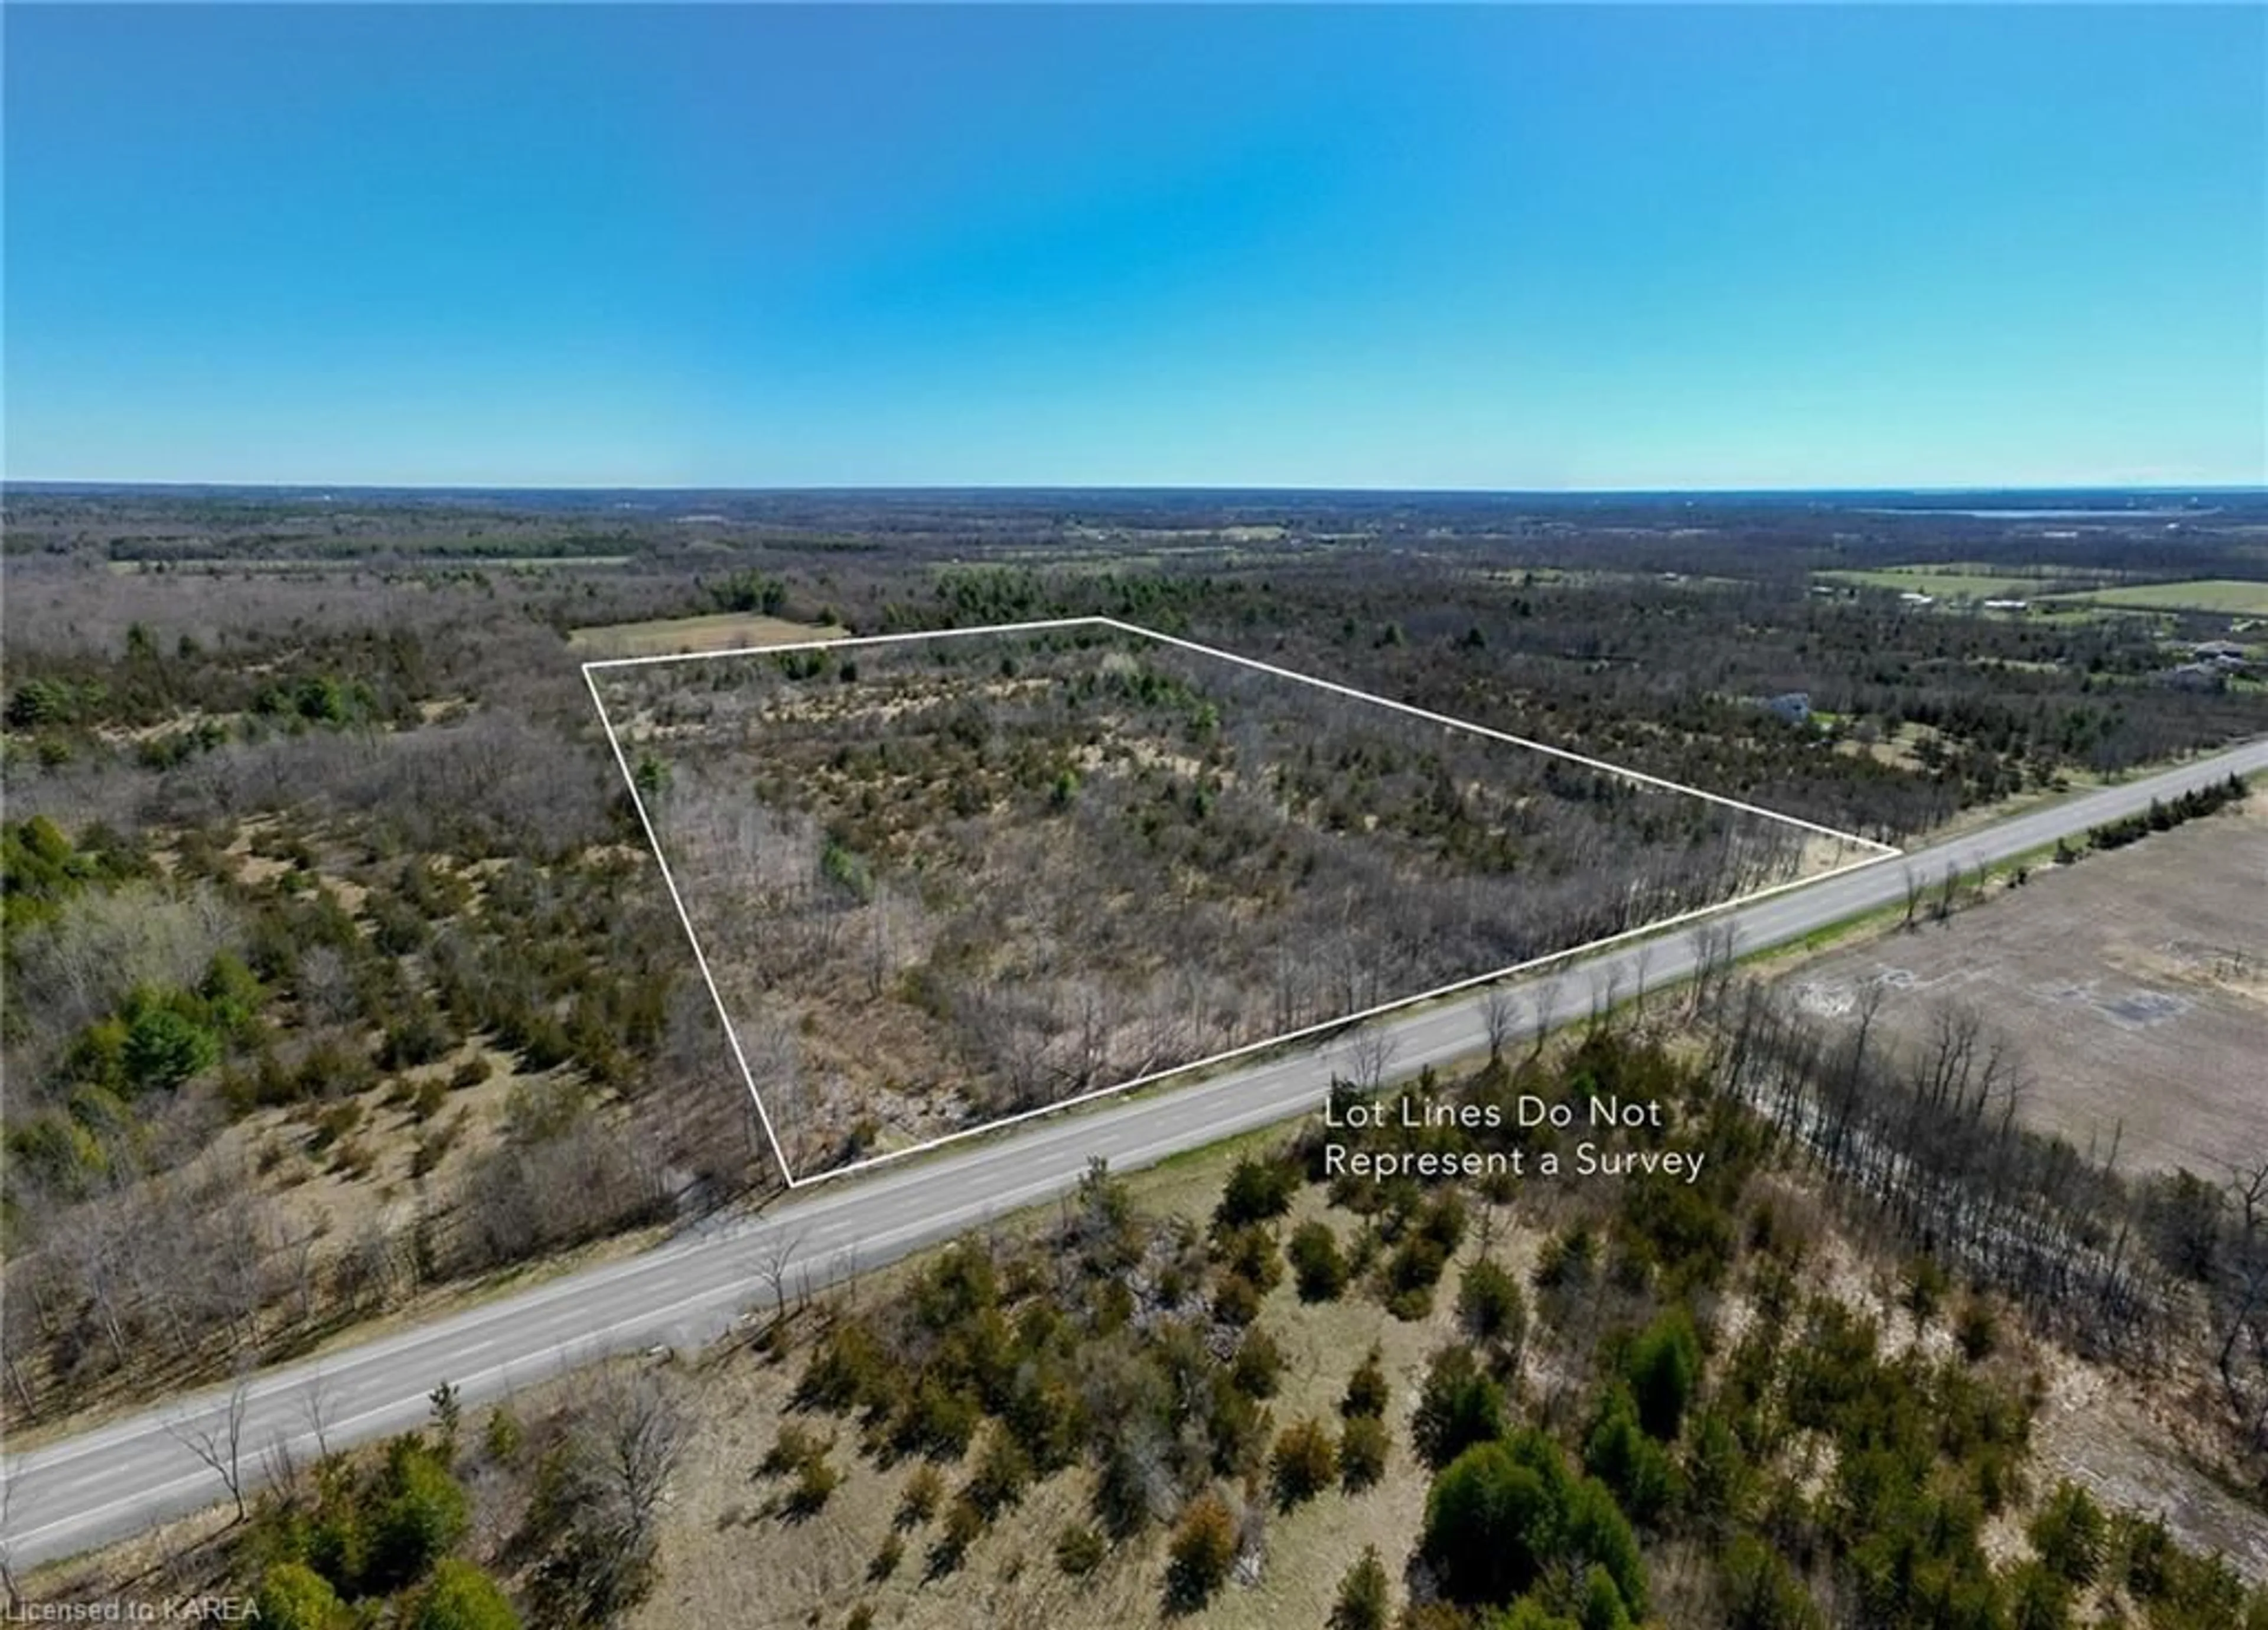 Lakeview for PT LT 35 County Road 6 Rd, Loyalist Township Ontario K0K 3N0